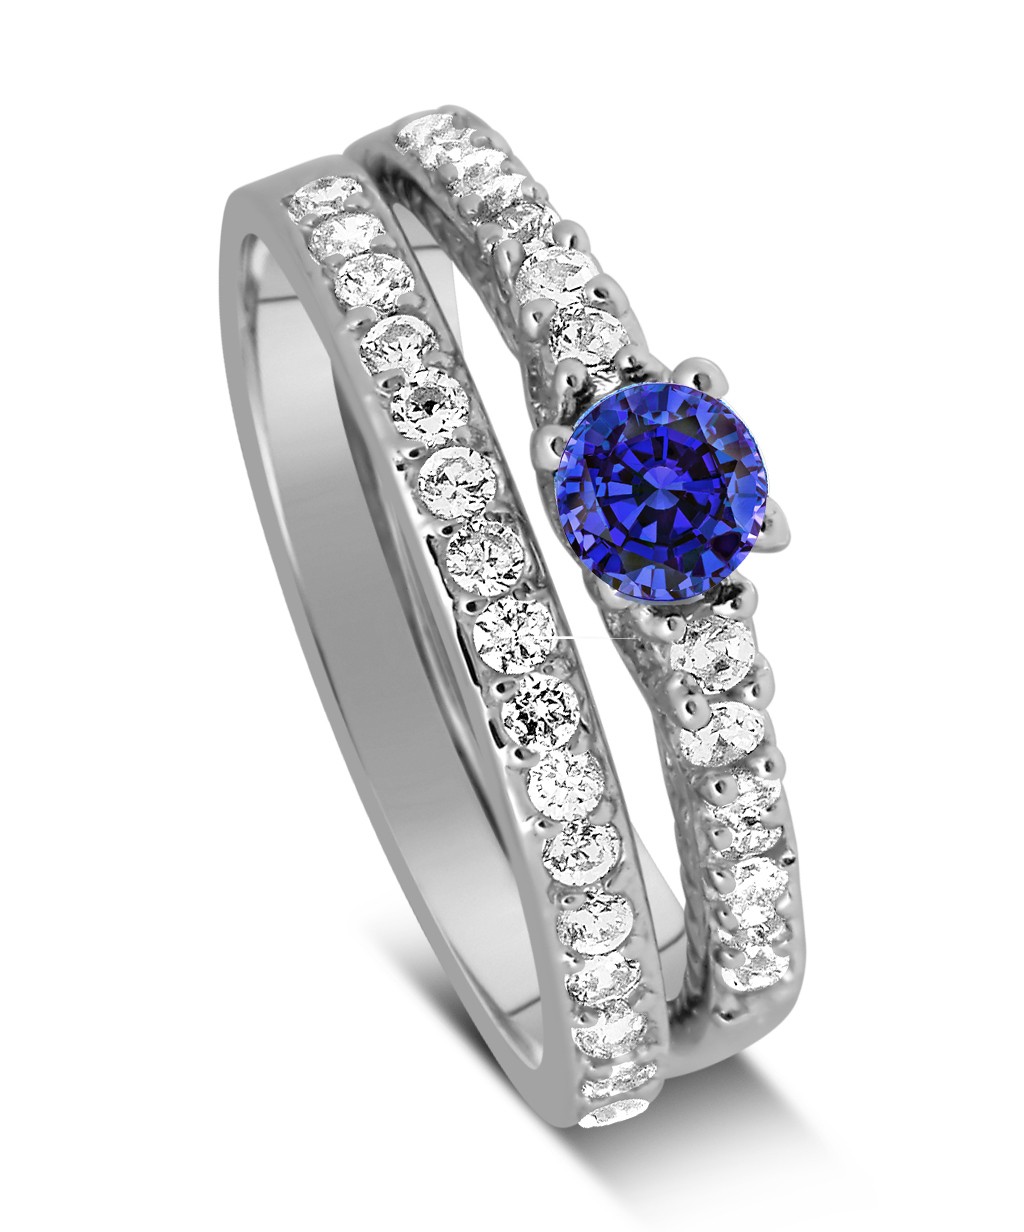 1.50 Carat Vintage Round cut Blue Sapphire and Diamond Wedding Ring Set in White Gold JeenJewels